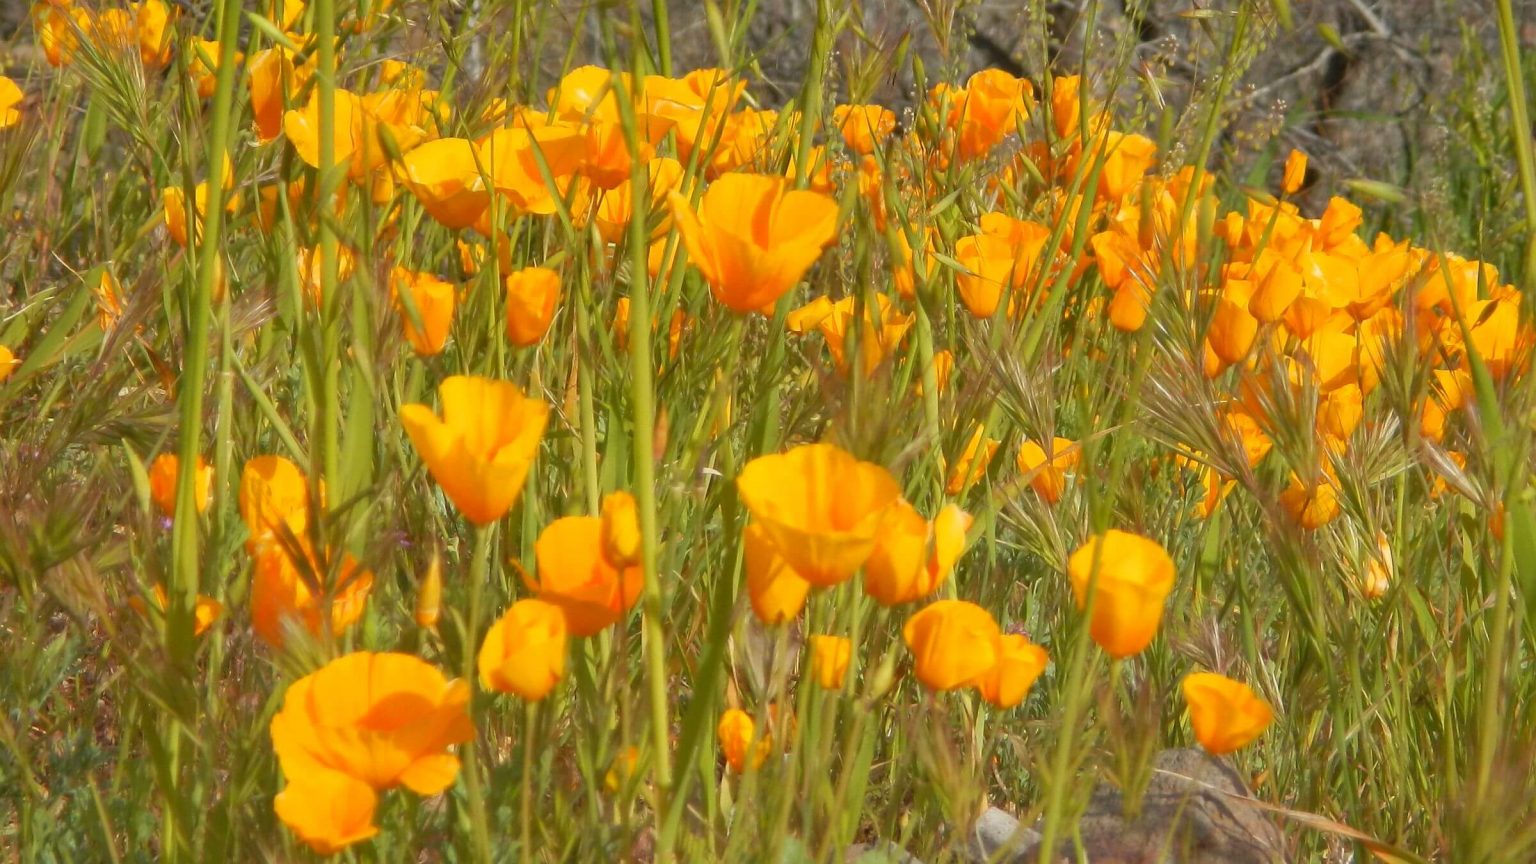 Superstition Wilderness, backpacking, California poppy (Eschscholzia californica), March